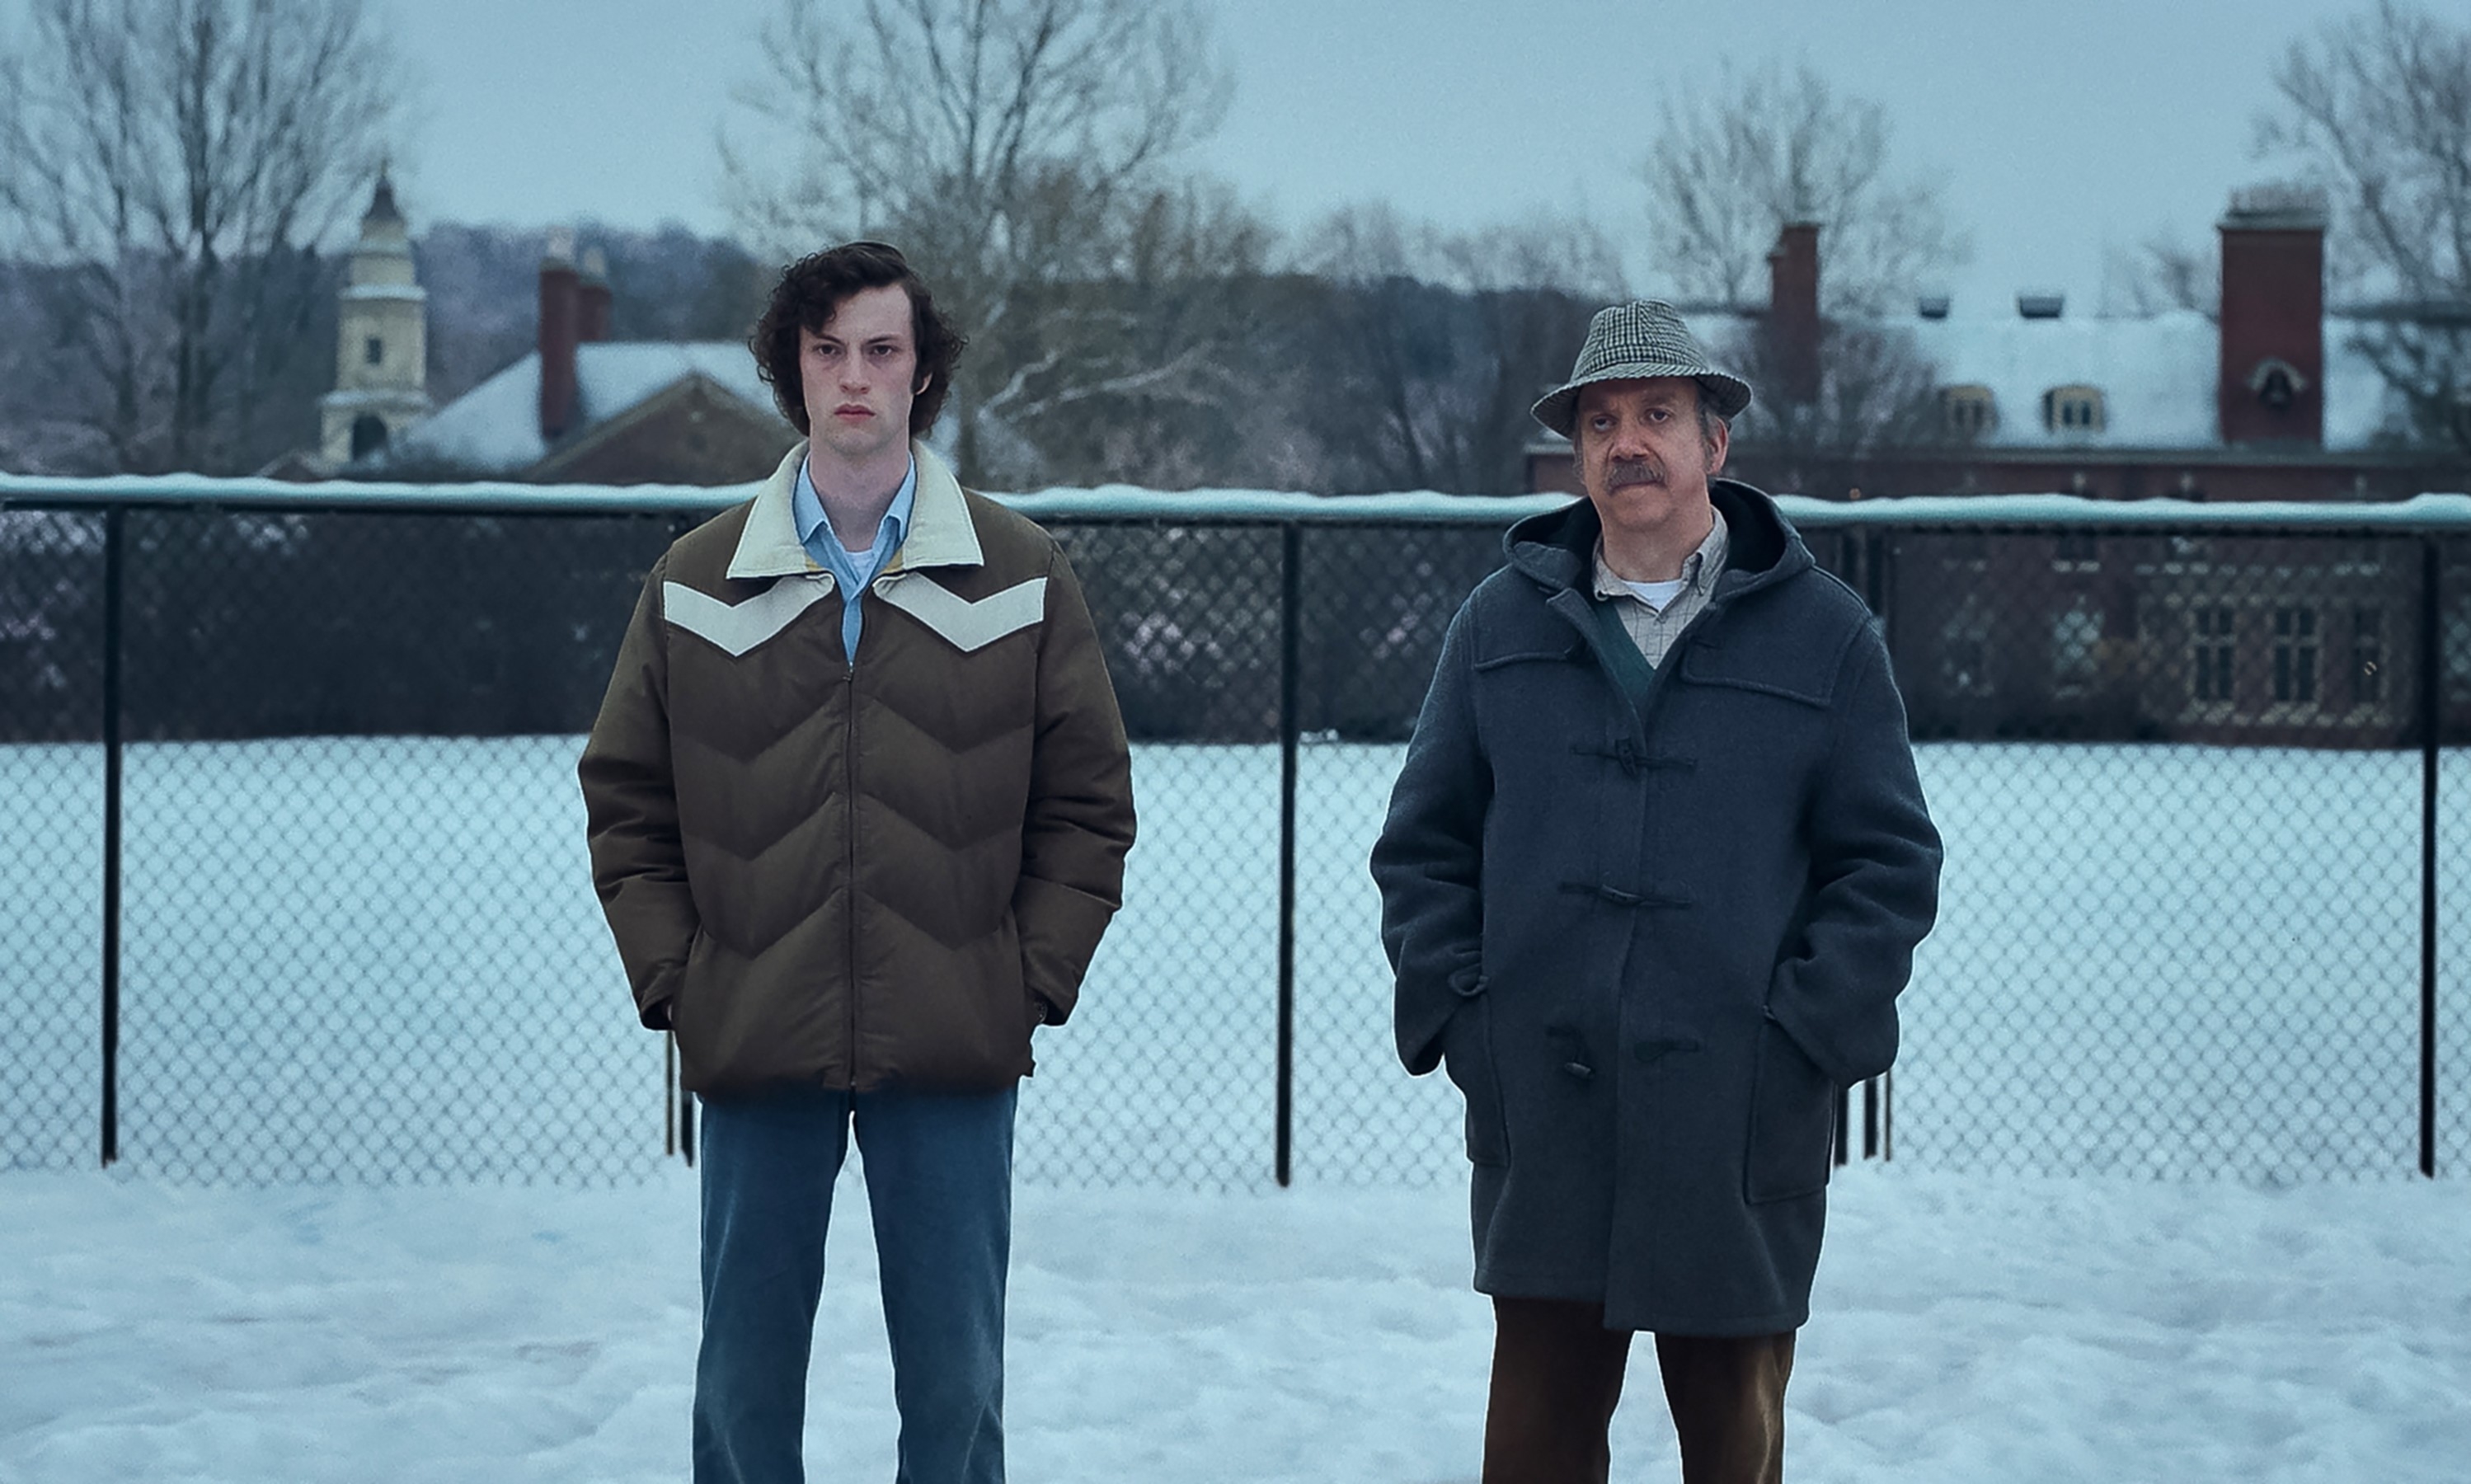 Dominic and Paul in the movie standing in a snowy field